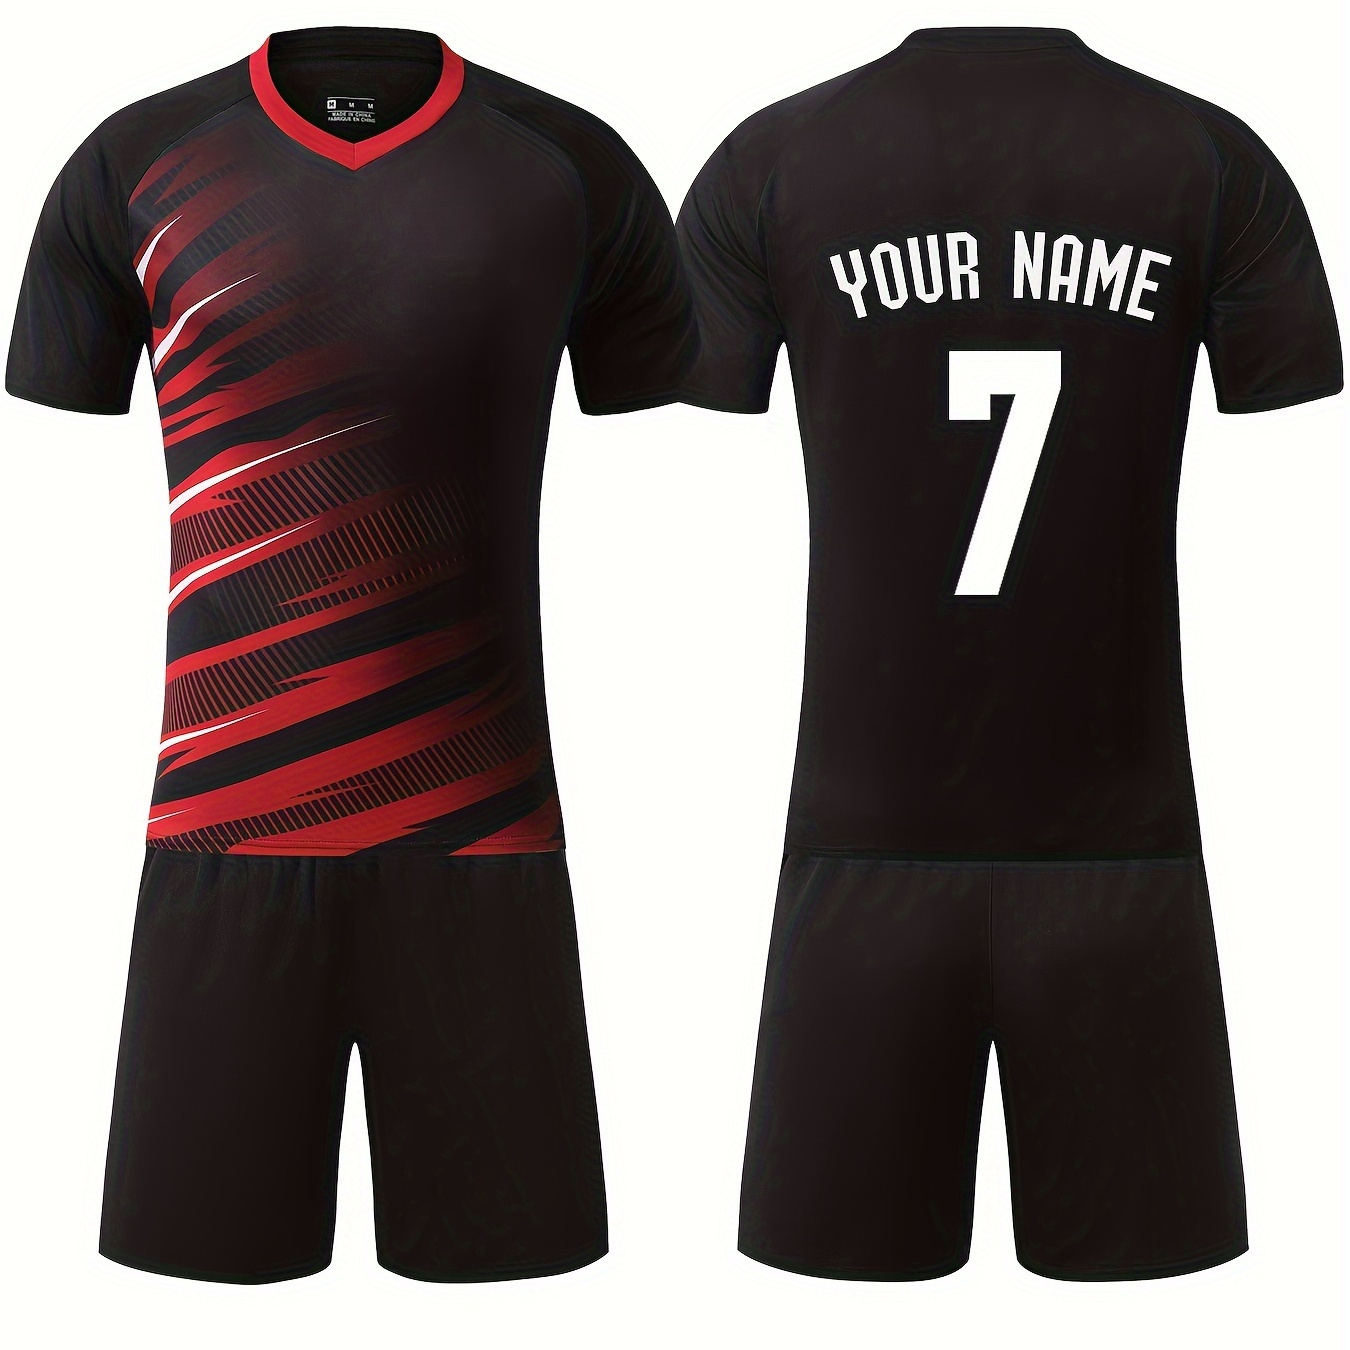 

Customized Boys Soccer Jersey Set, Breathable Mesh Quick-dry V-neck Short Sleeve Top And Shorts, Personalized Name & Number, Boys & Girls Football Kit